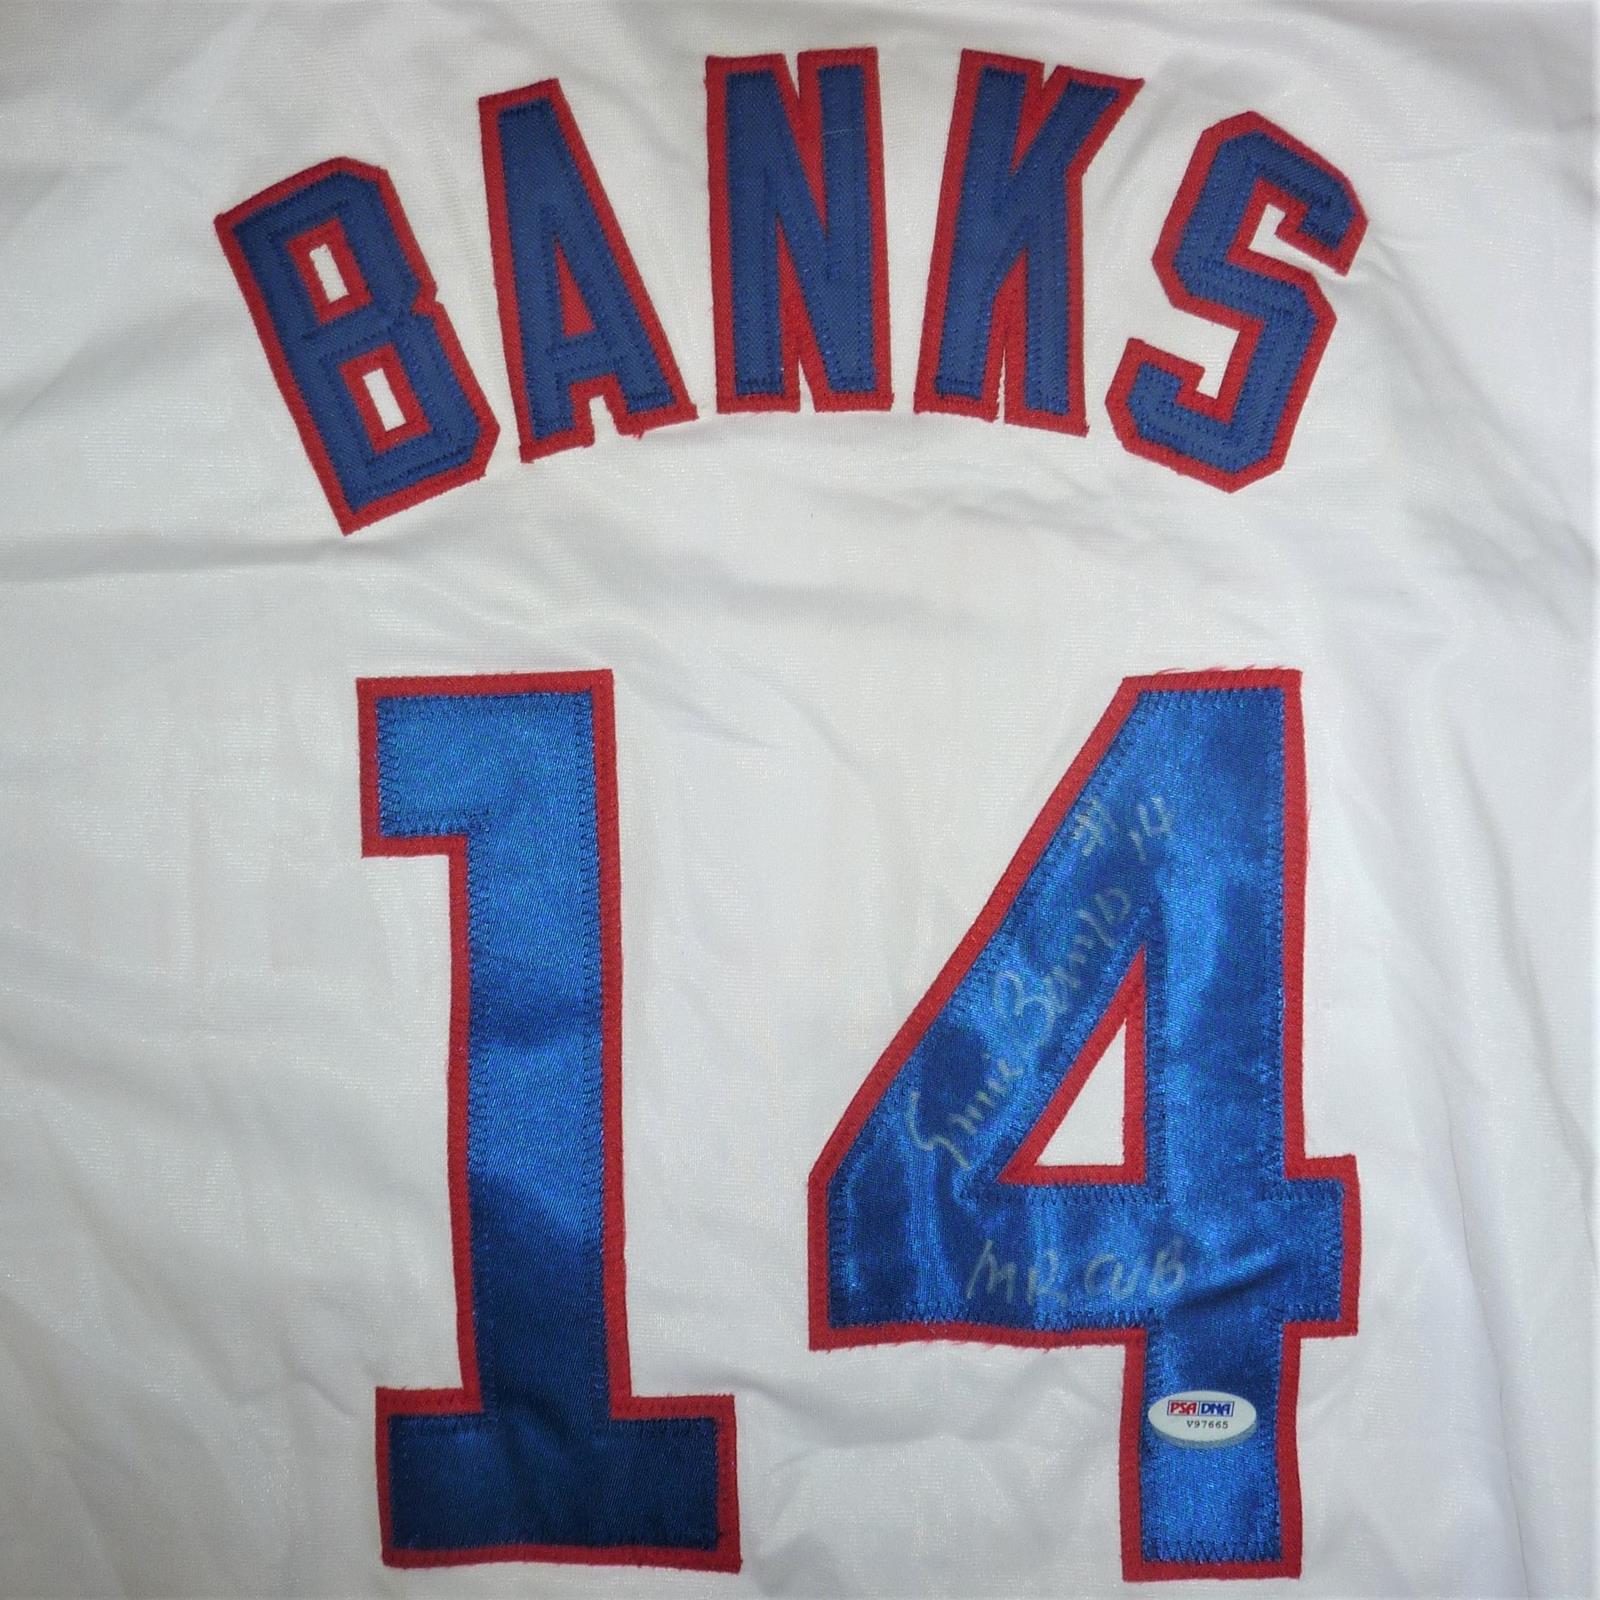 Latitude Sports Marketing Ernie Banks #14 Chicago Cubs Autographed Jersey